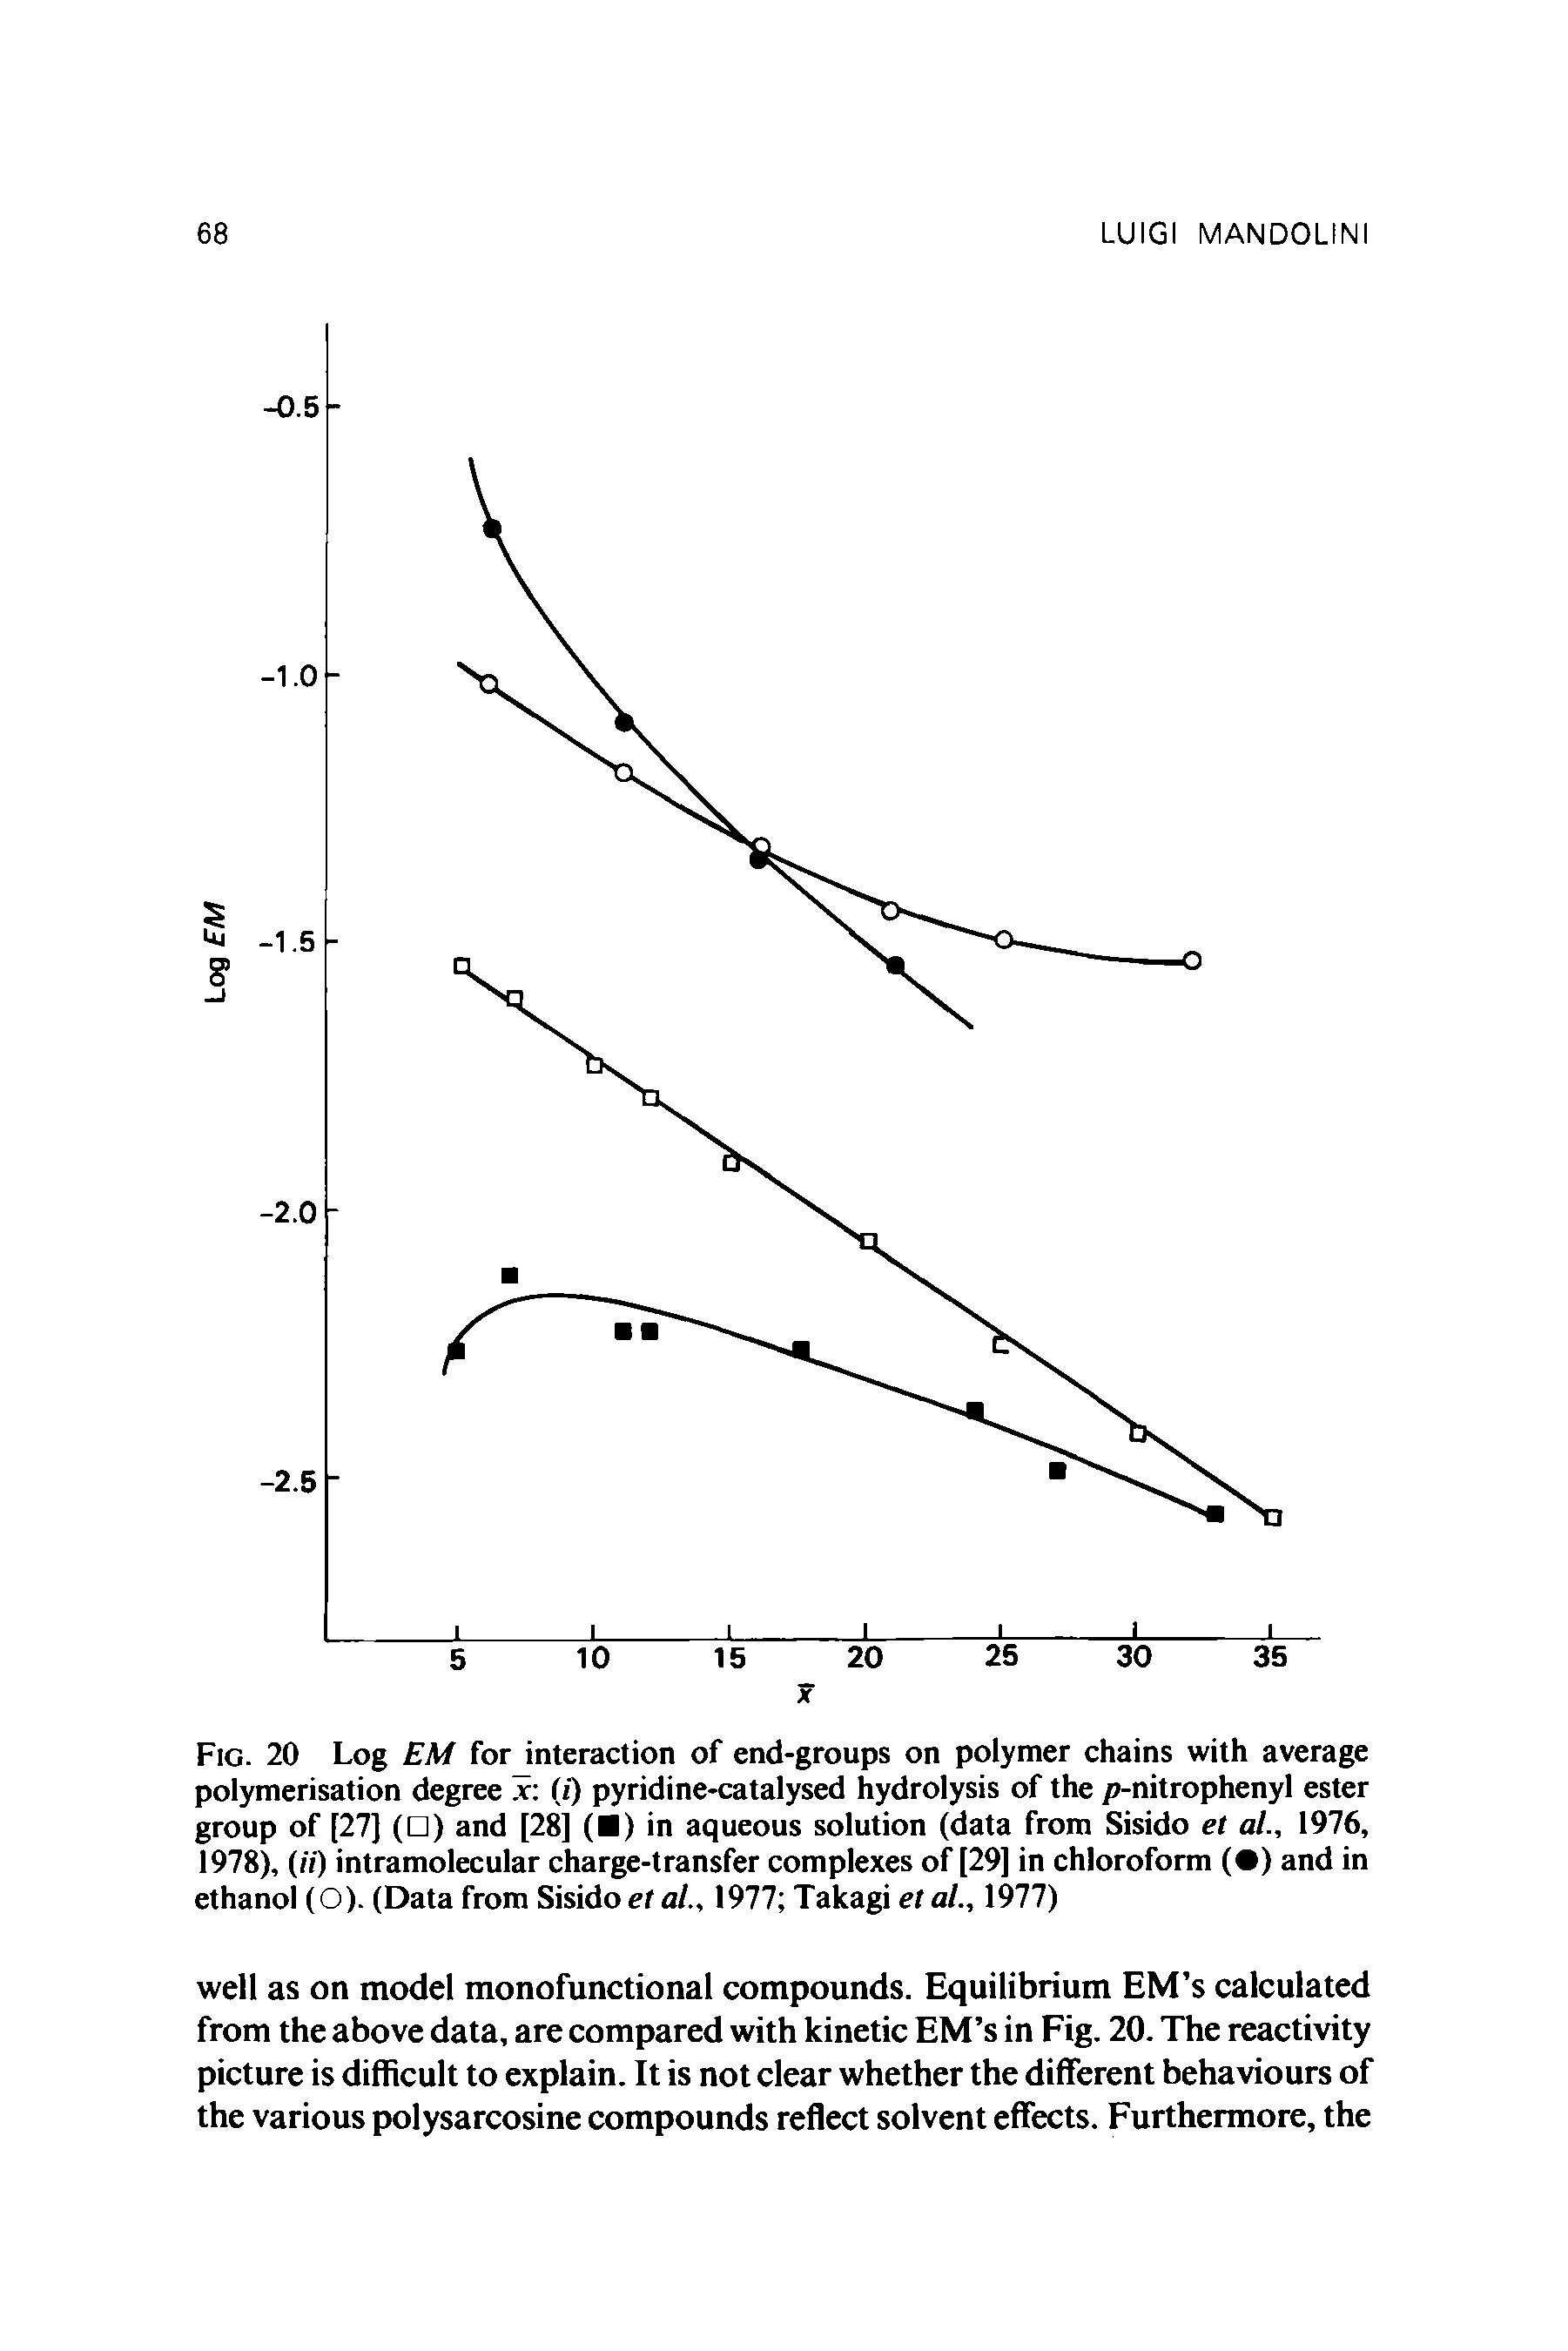 Fig. 20 Log EM for interaction of end-groups on polymer chains with average polymerisation degree 3c (i) pyridine-catalysed hydrolysis of the p-nitrophenyl ester group of [27] ( ) and [28] ( ) in aqueous solution (data from Sisido et at., 1976, 1978), (f i) intramolecular charge-transfer complexes of [29] in chloroform ( ) and in ethanol (O). (Data from Sisido et at., 1977 Takagi et at., 1977)...